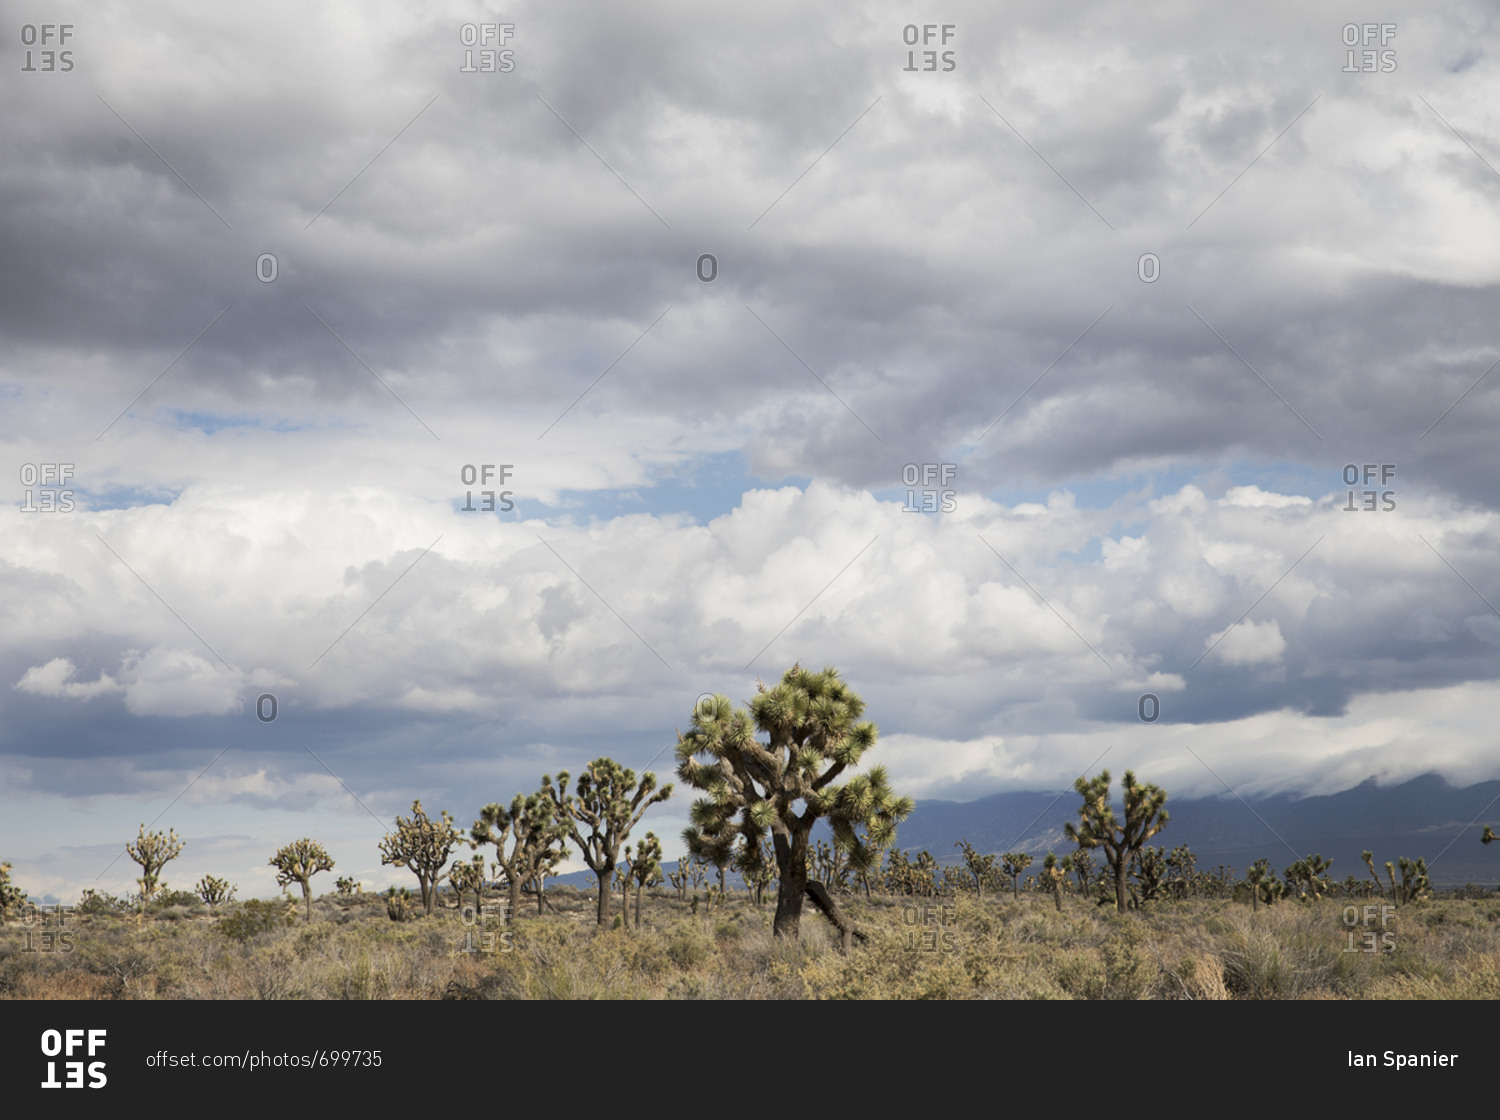 Joshua Trees sprout from the flat desert landscape in California